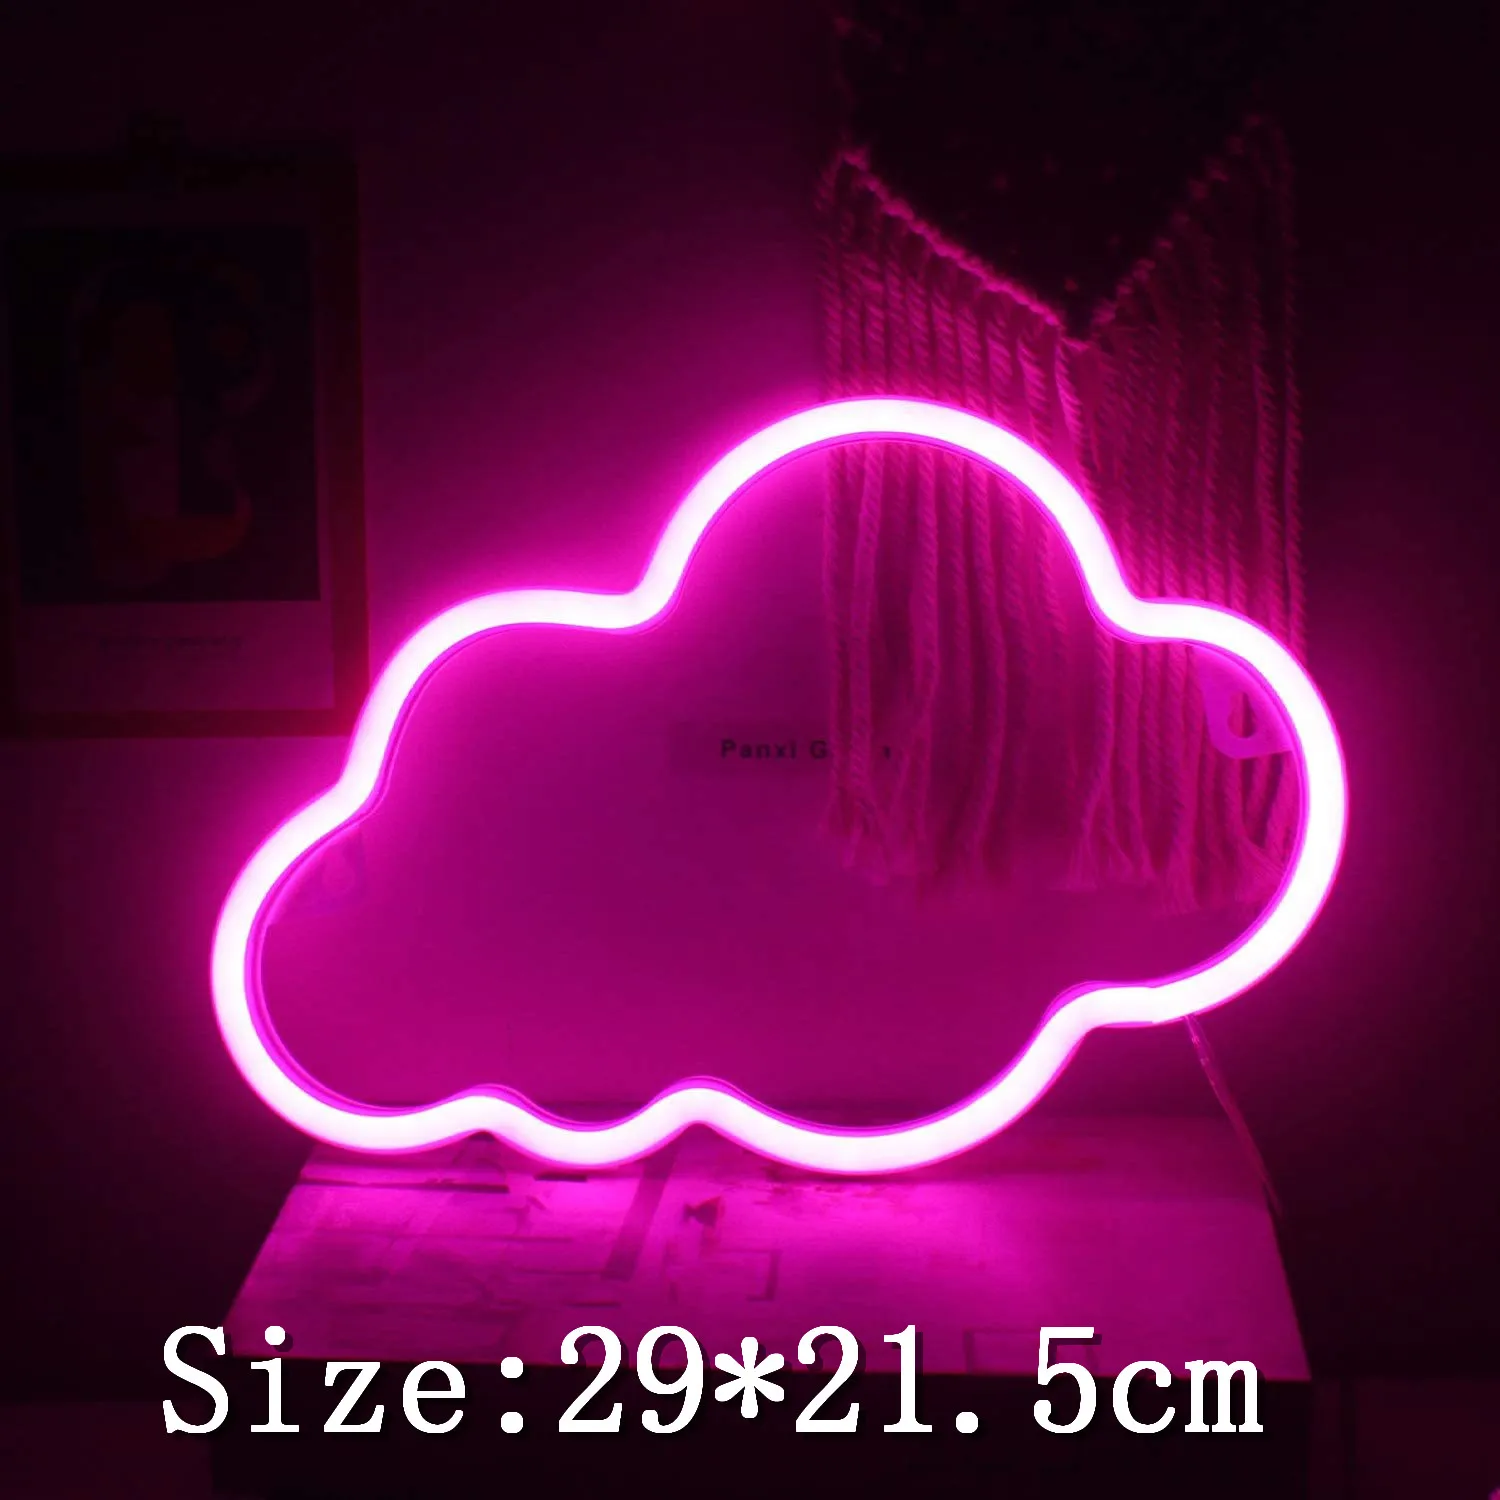 Cloud + Lightning Neon Sign LED Neon Lights Wall Decoration Hanging Lamps for Room Kids Birthday Gifts Battery or USB Operated Night Lights Night Lights